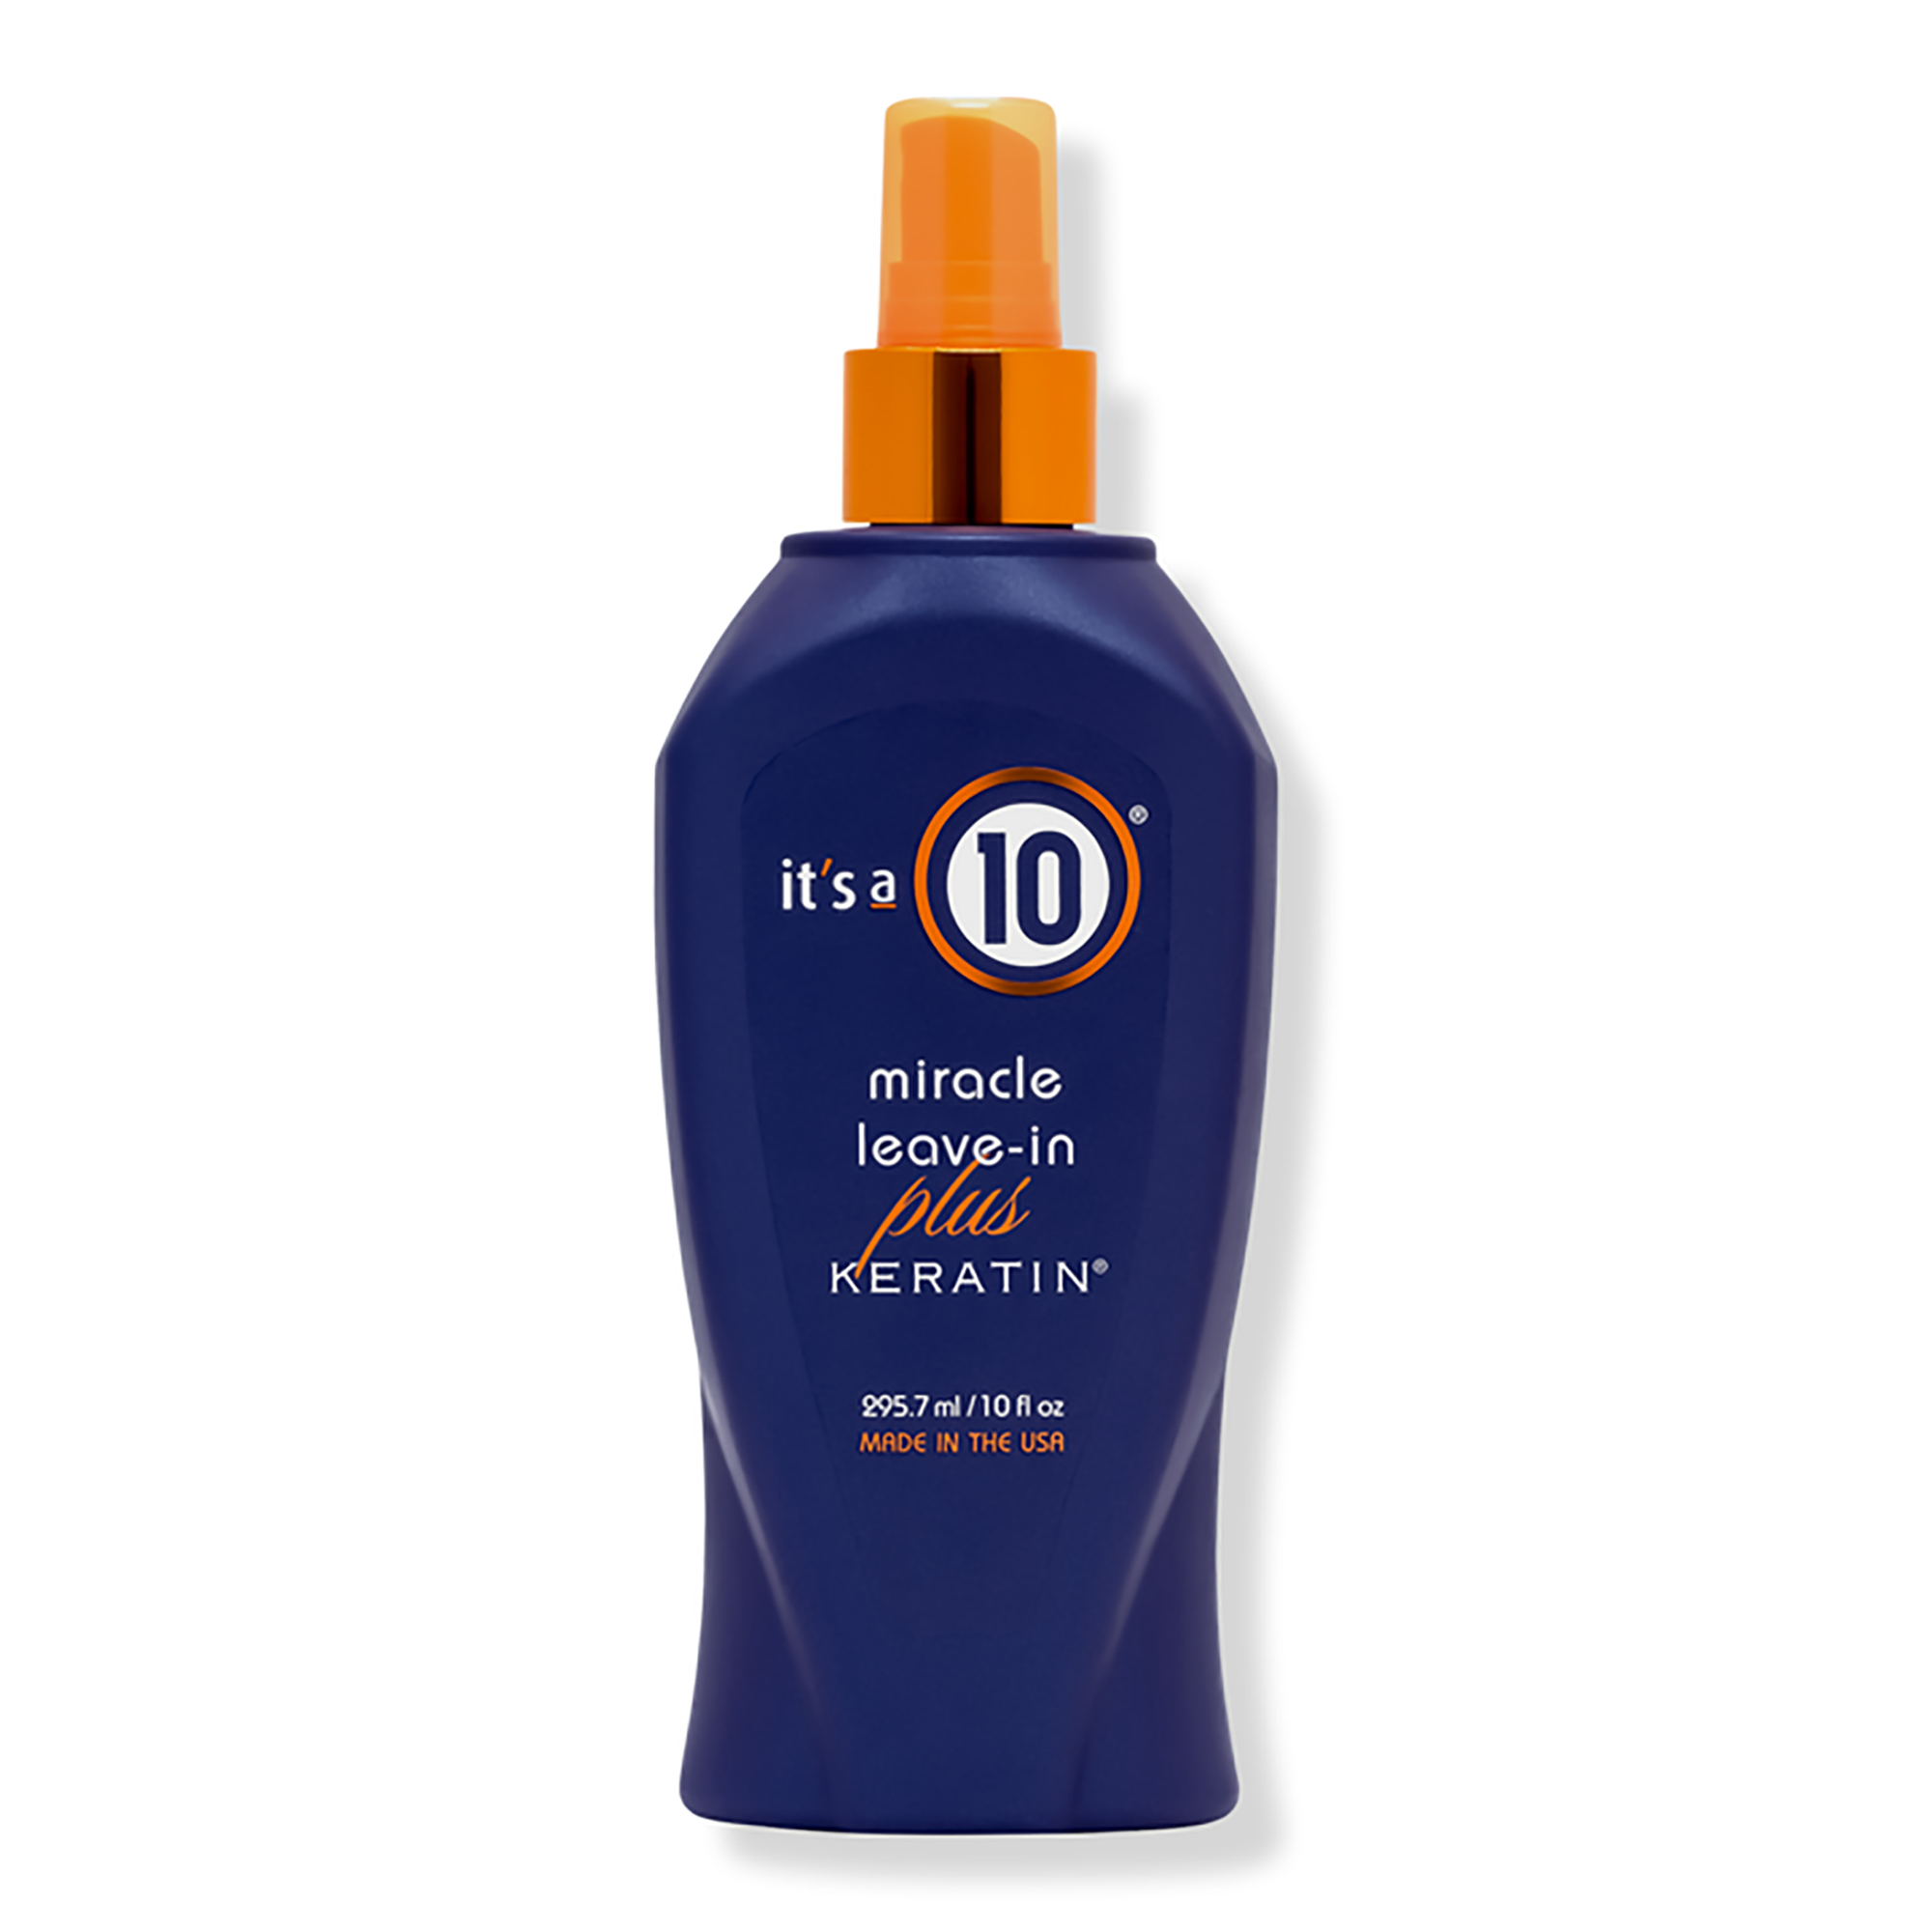 It's A 10 Miracle Leave-In Plus Keratin Spray / 10.OZ